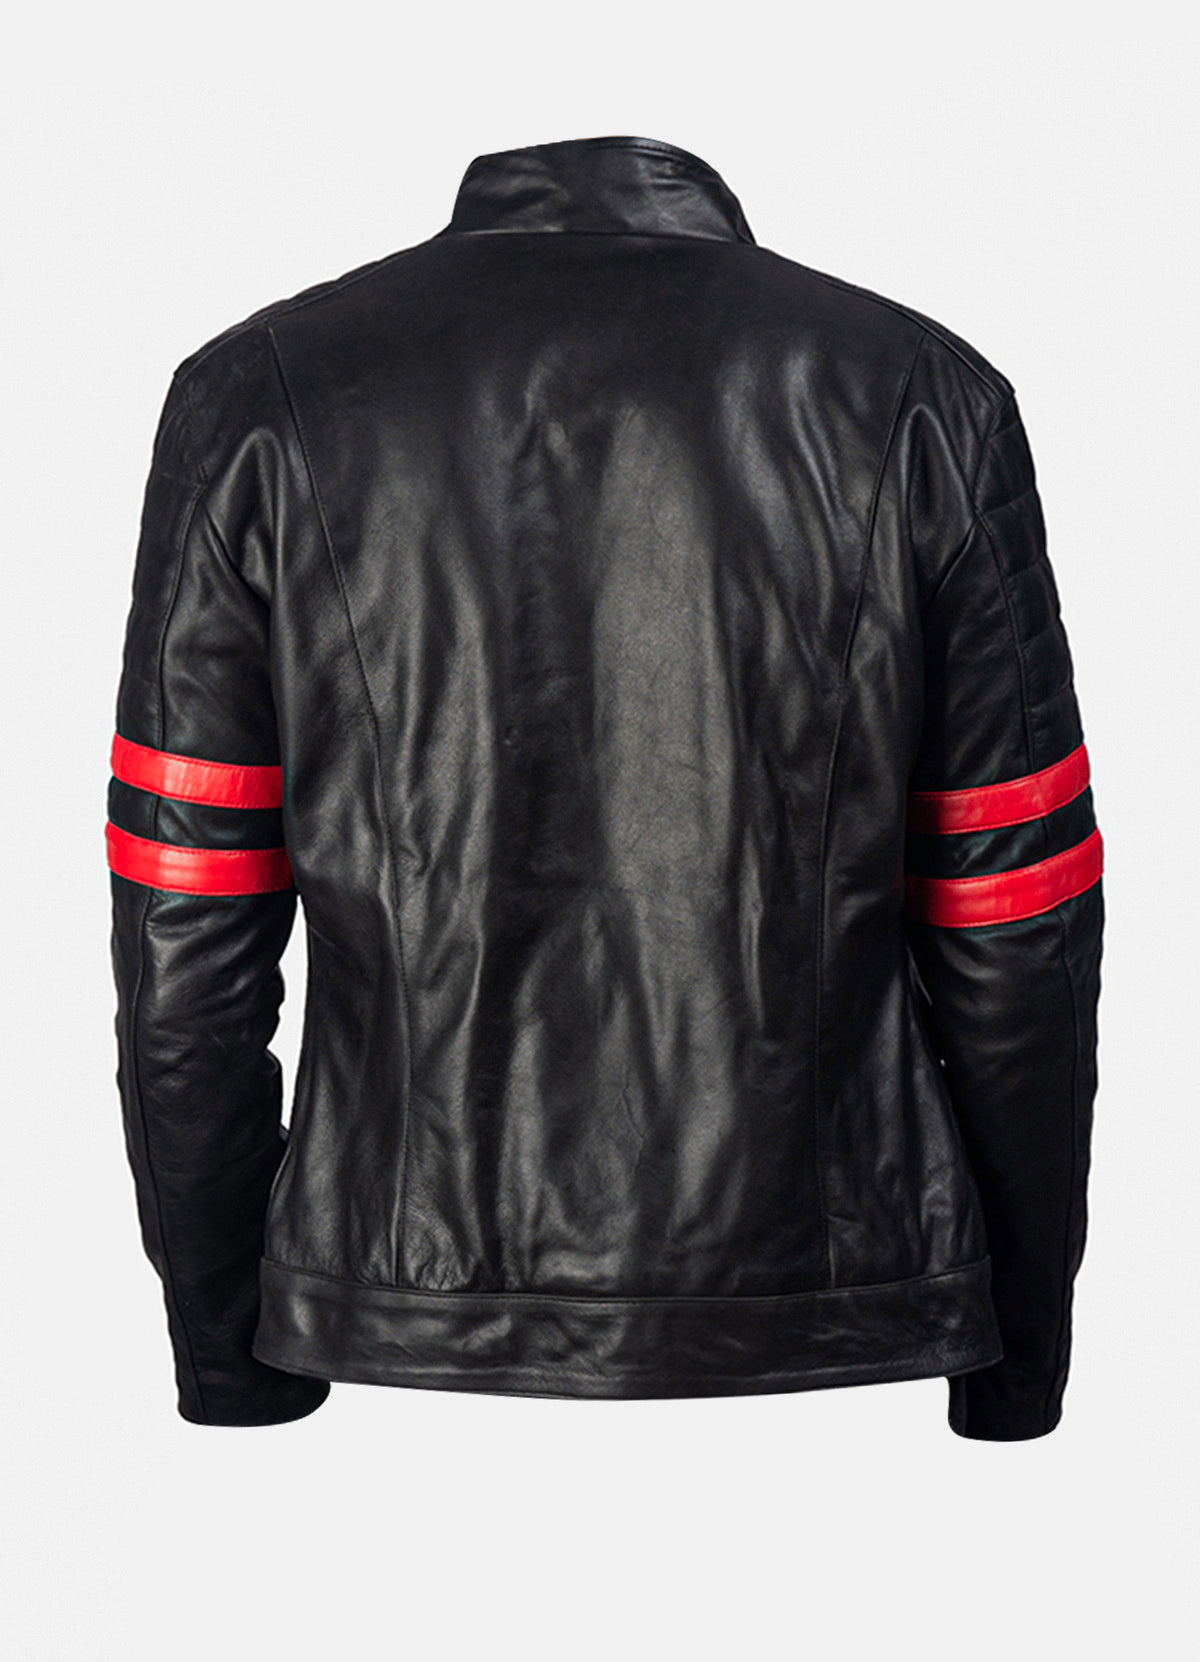 Mens Perfecto Black & Red Biker Leather Jacket